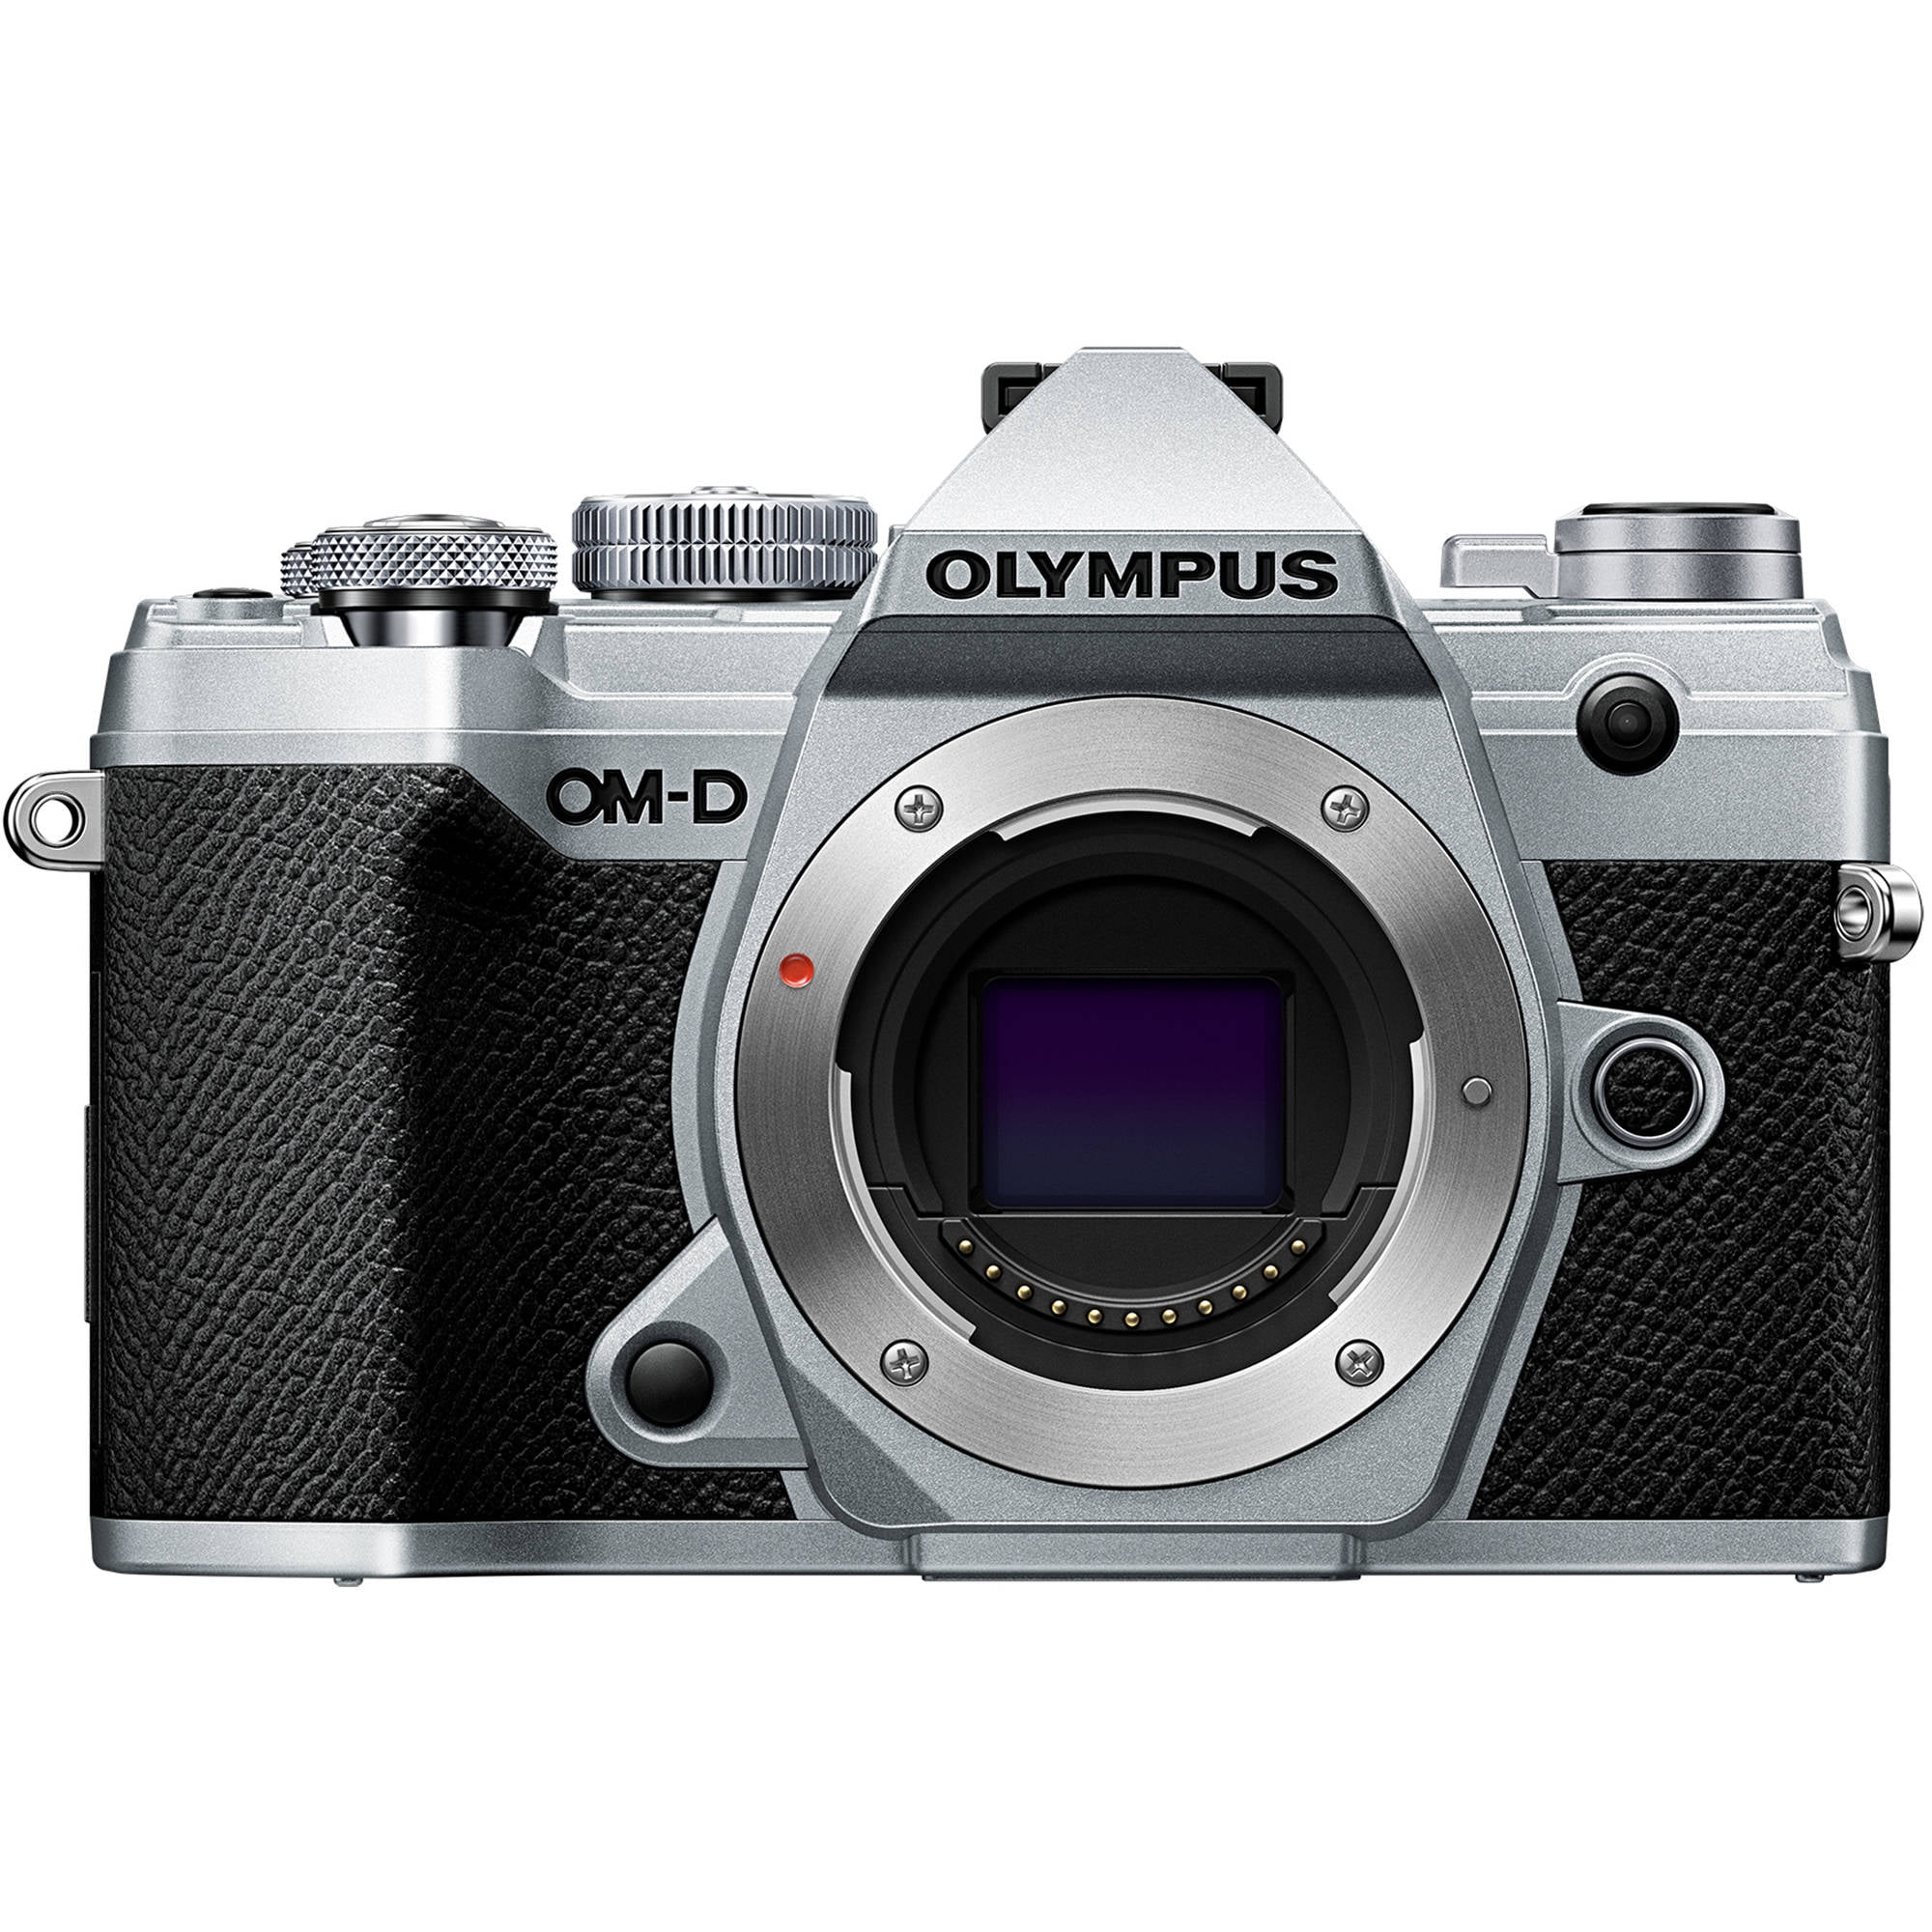 Picture of Olympus America V207090SU000 OM-D E-M5 Mark III 20.4 Megapixel Mirrorless Camera Body Only - Silver